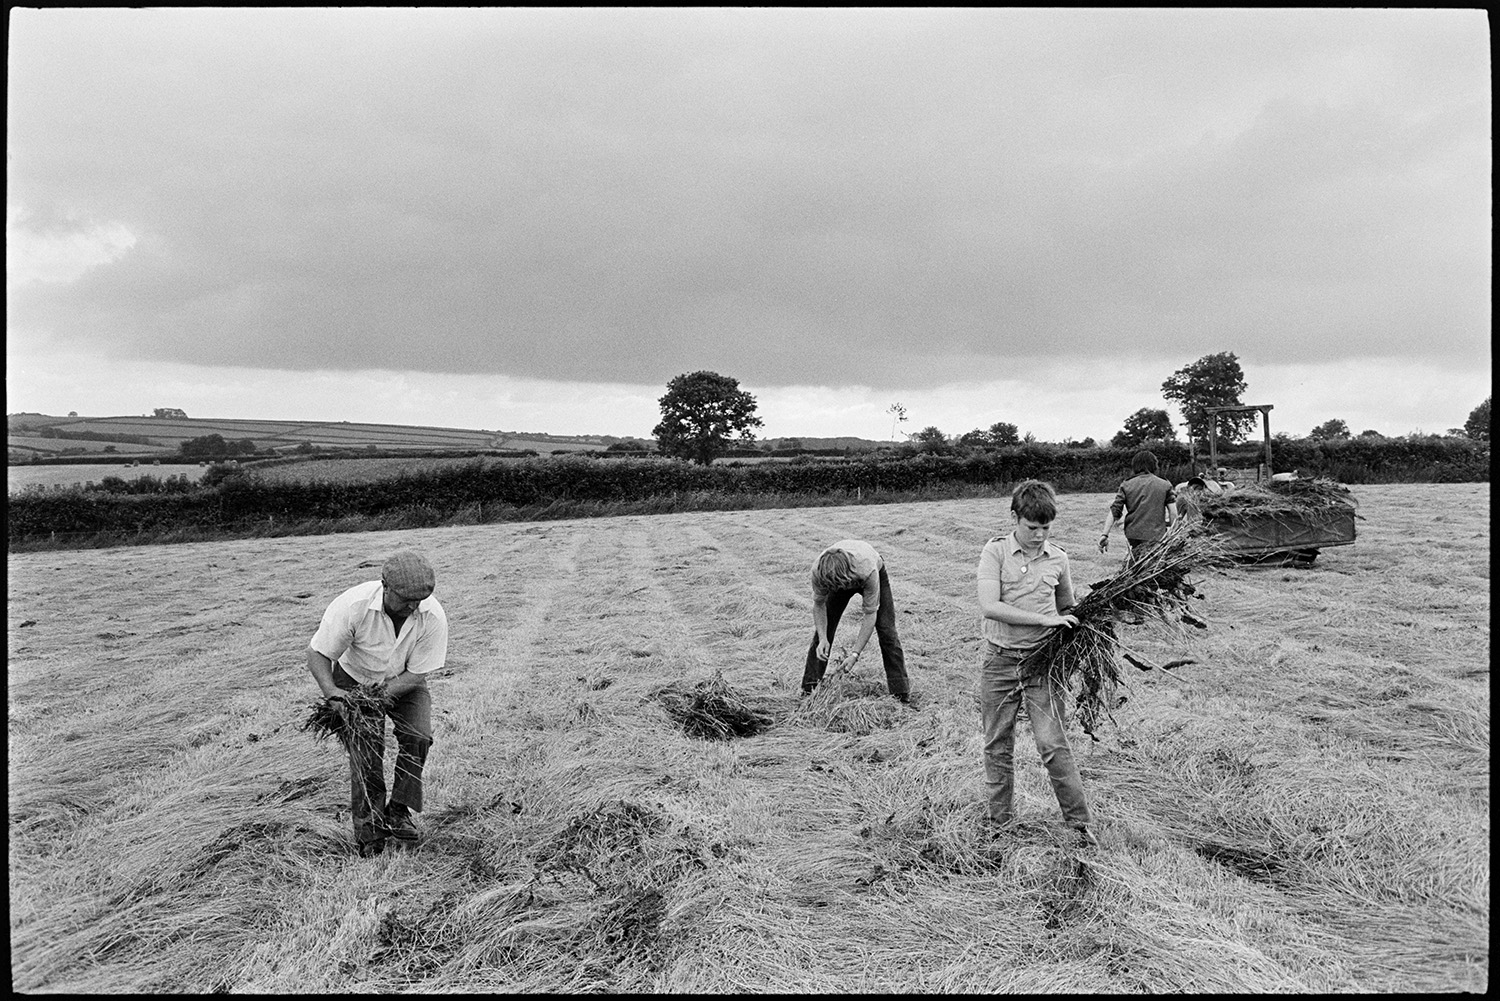 Men removing thistles from cut hay.
[Four people picking thistles out of cut hay lying on the ground in a field at Ashreigney. They are putting the thistles in a tractor and link box parked in the field. In the background surrounding fields can be seen.]